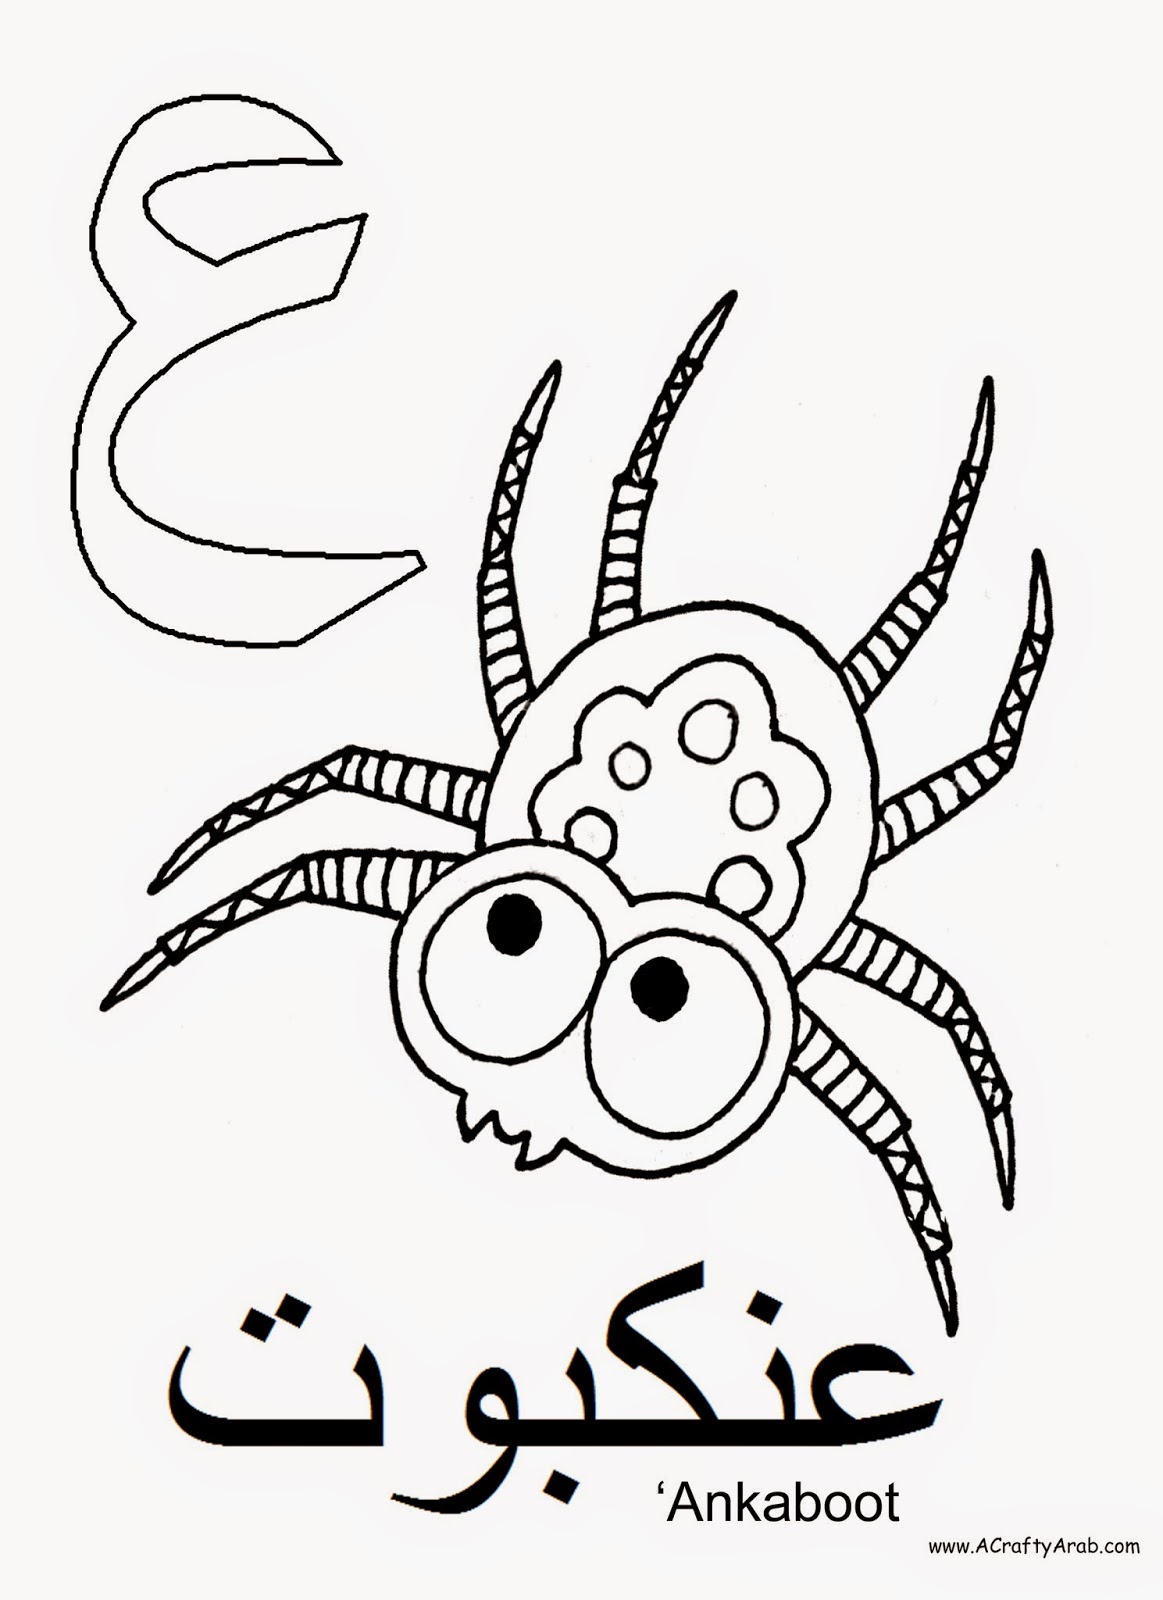 Arabic Alphabet Coloring Pages at GetColorings.com | Free ...